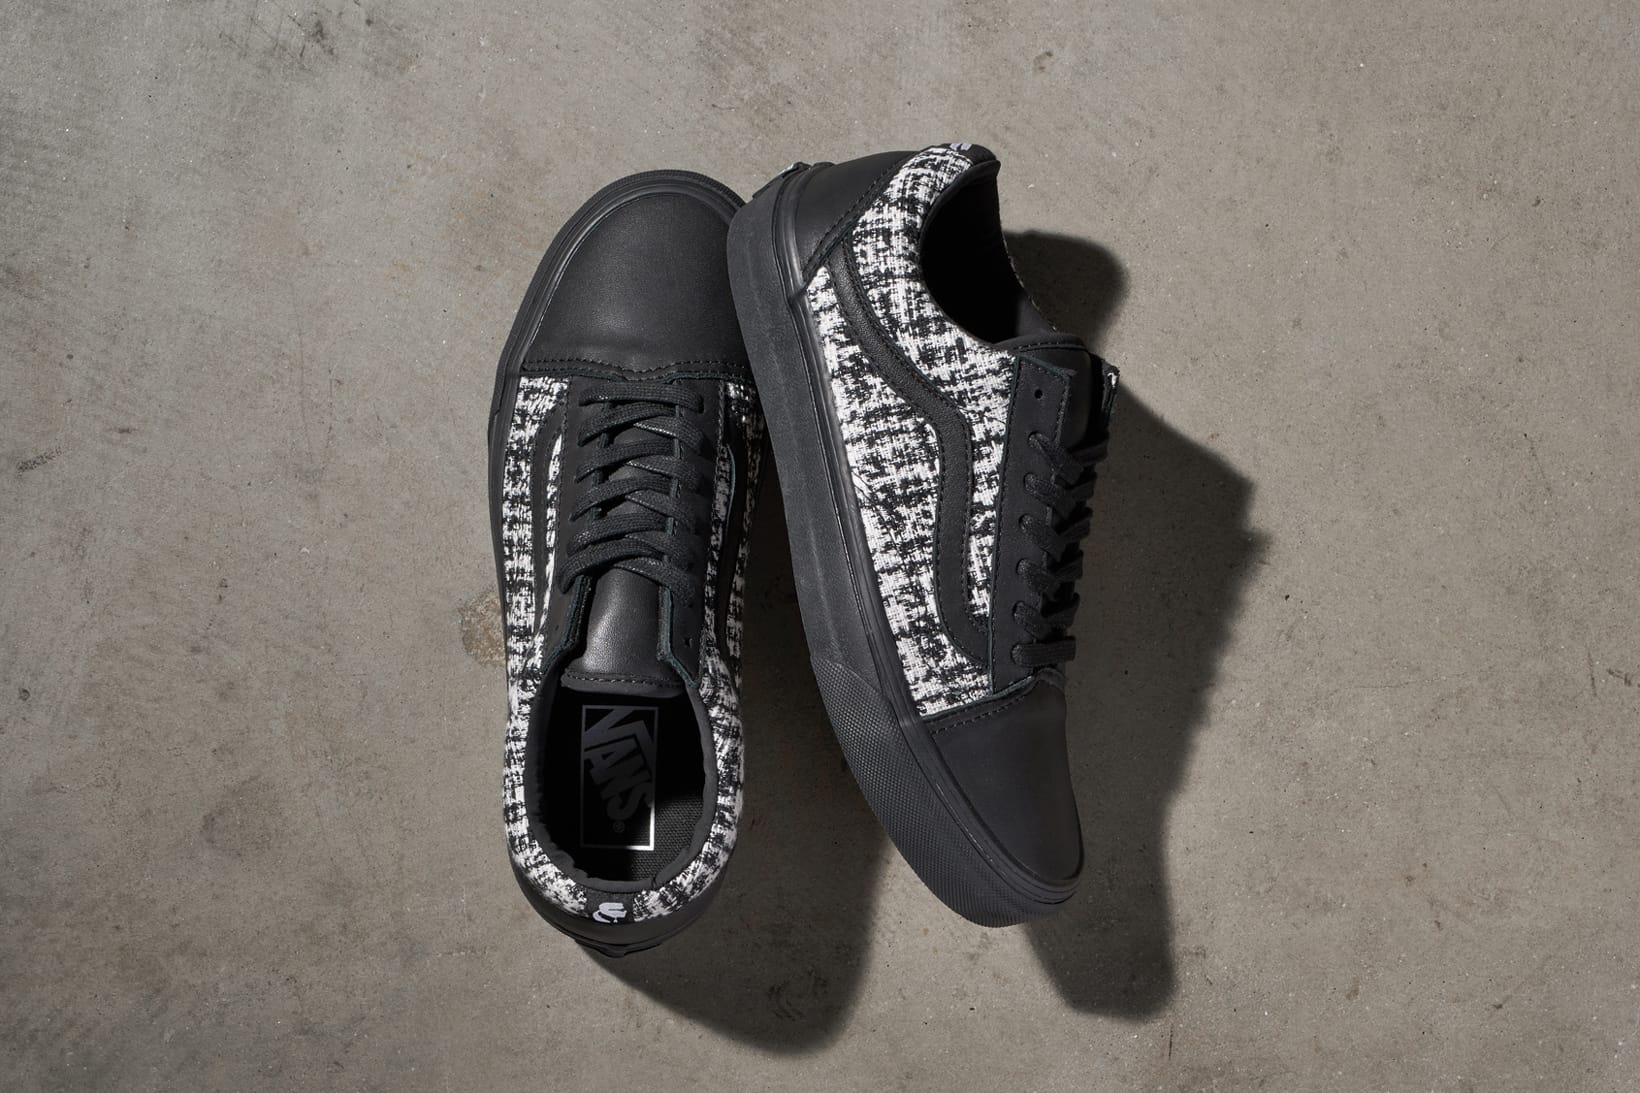 Karl Lagerfeld x Vans Collection 